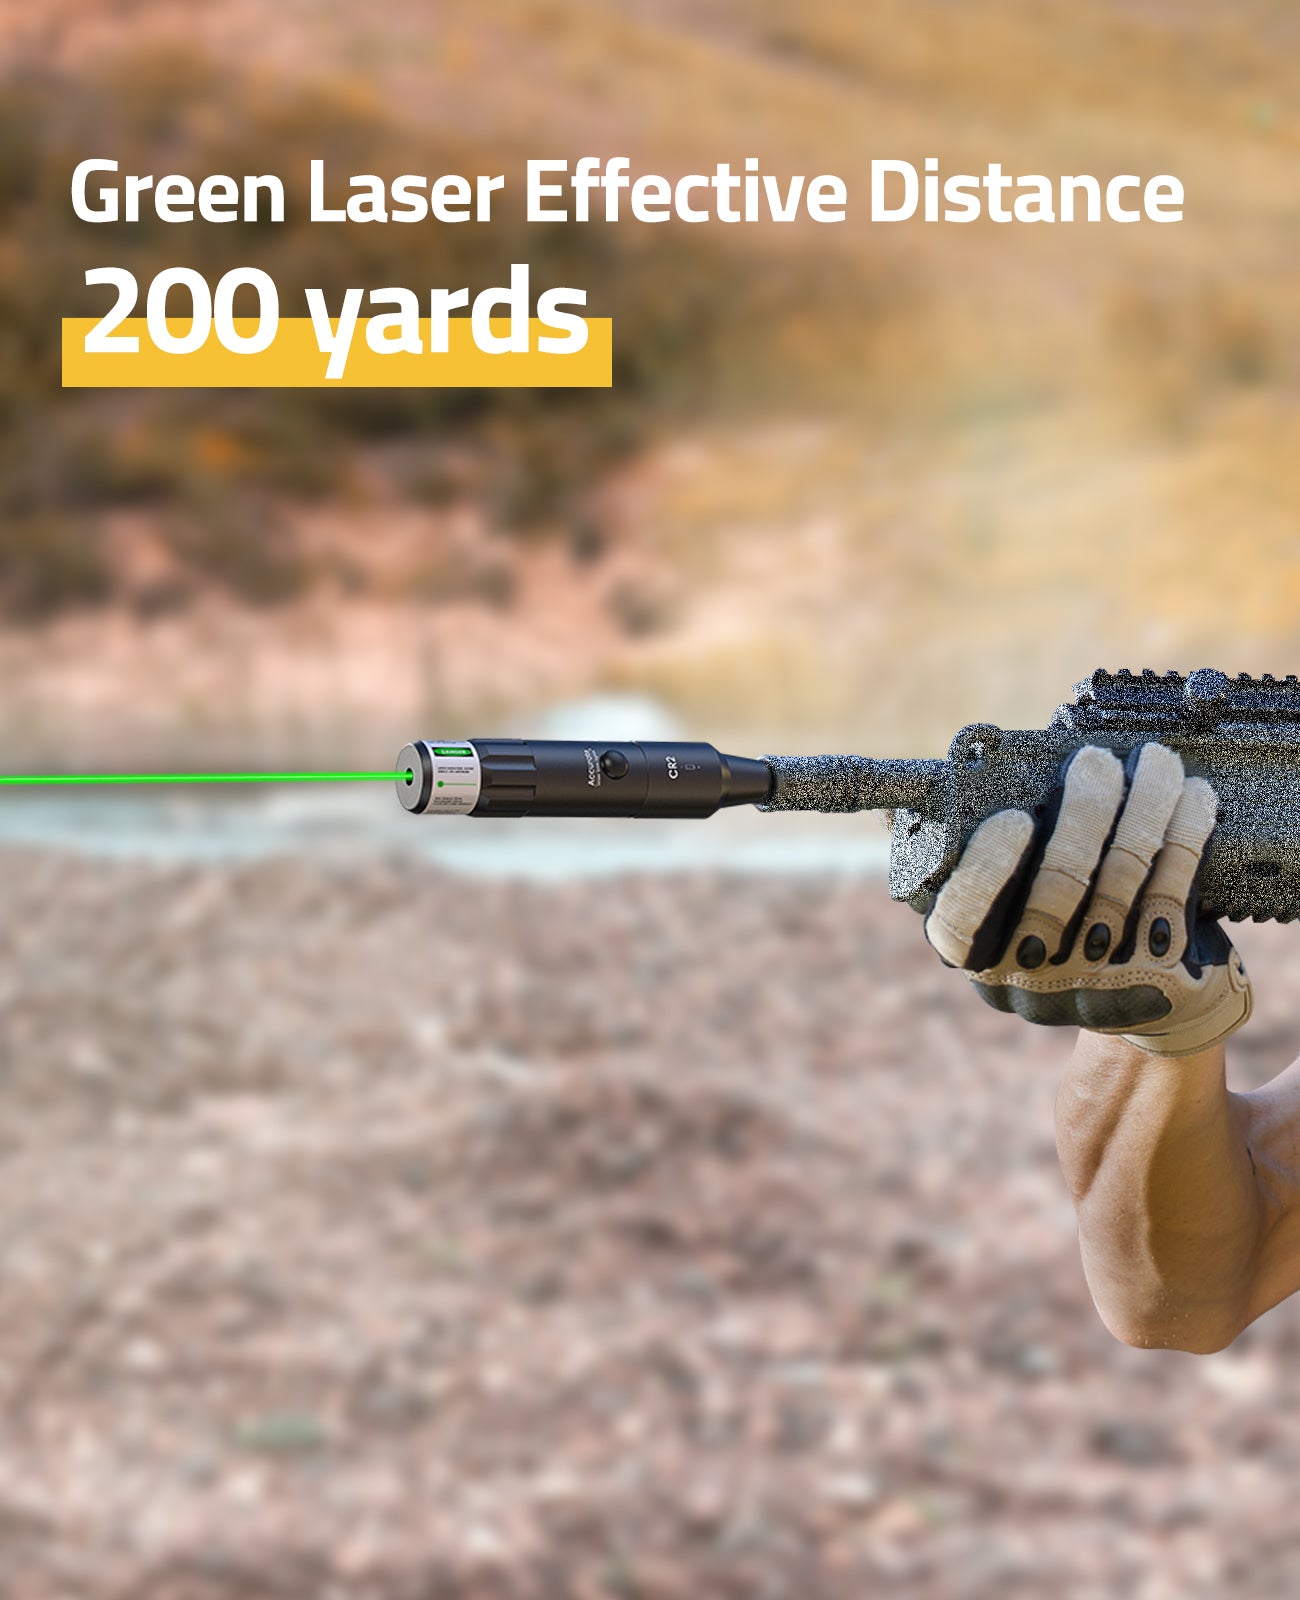 Laser Bore Sight with 200 yards Effective Distance